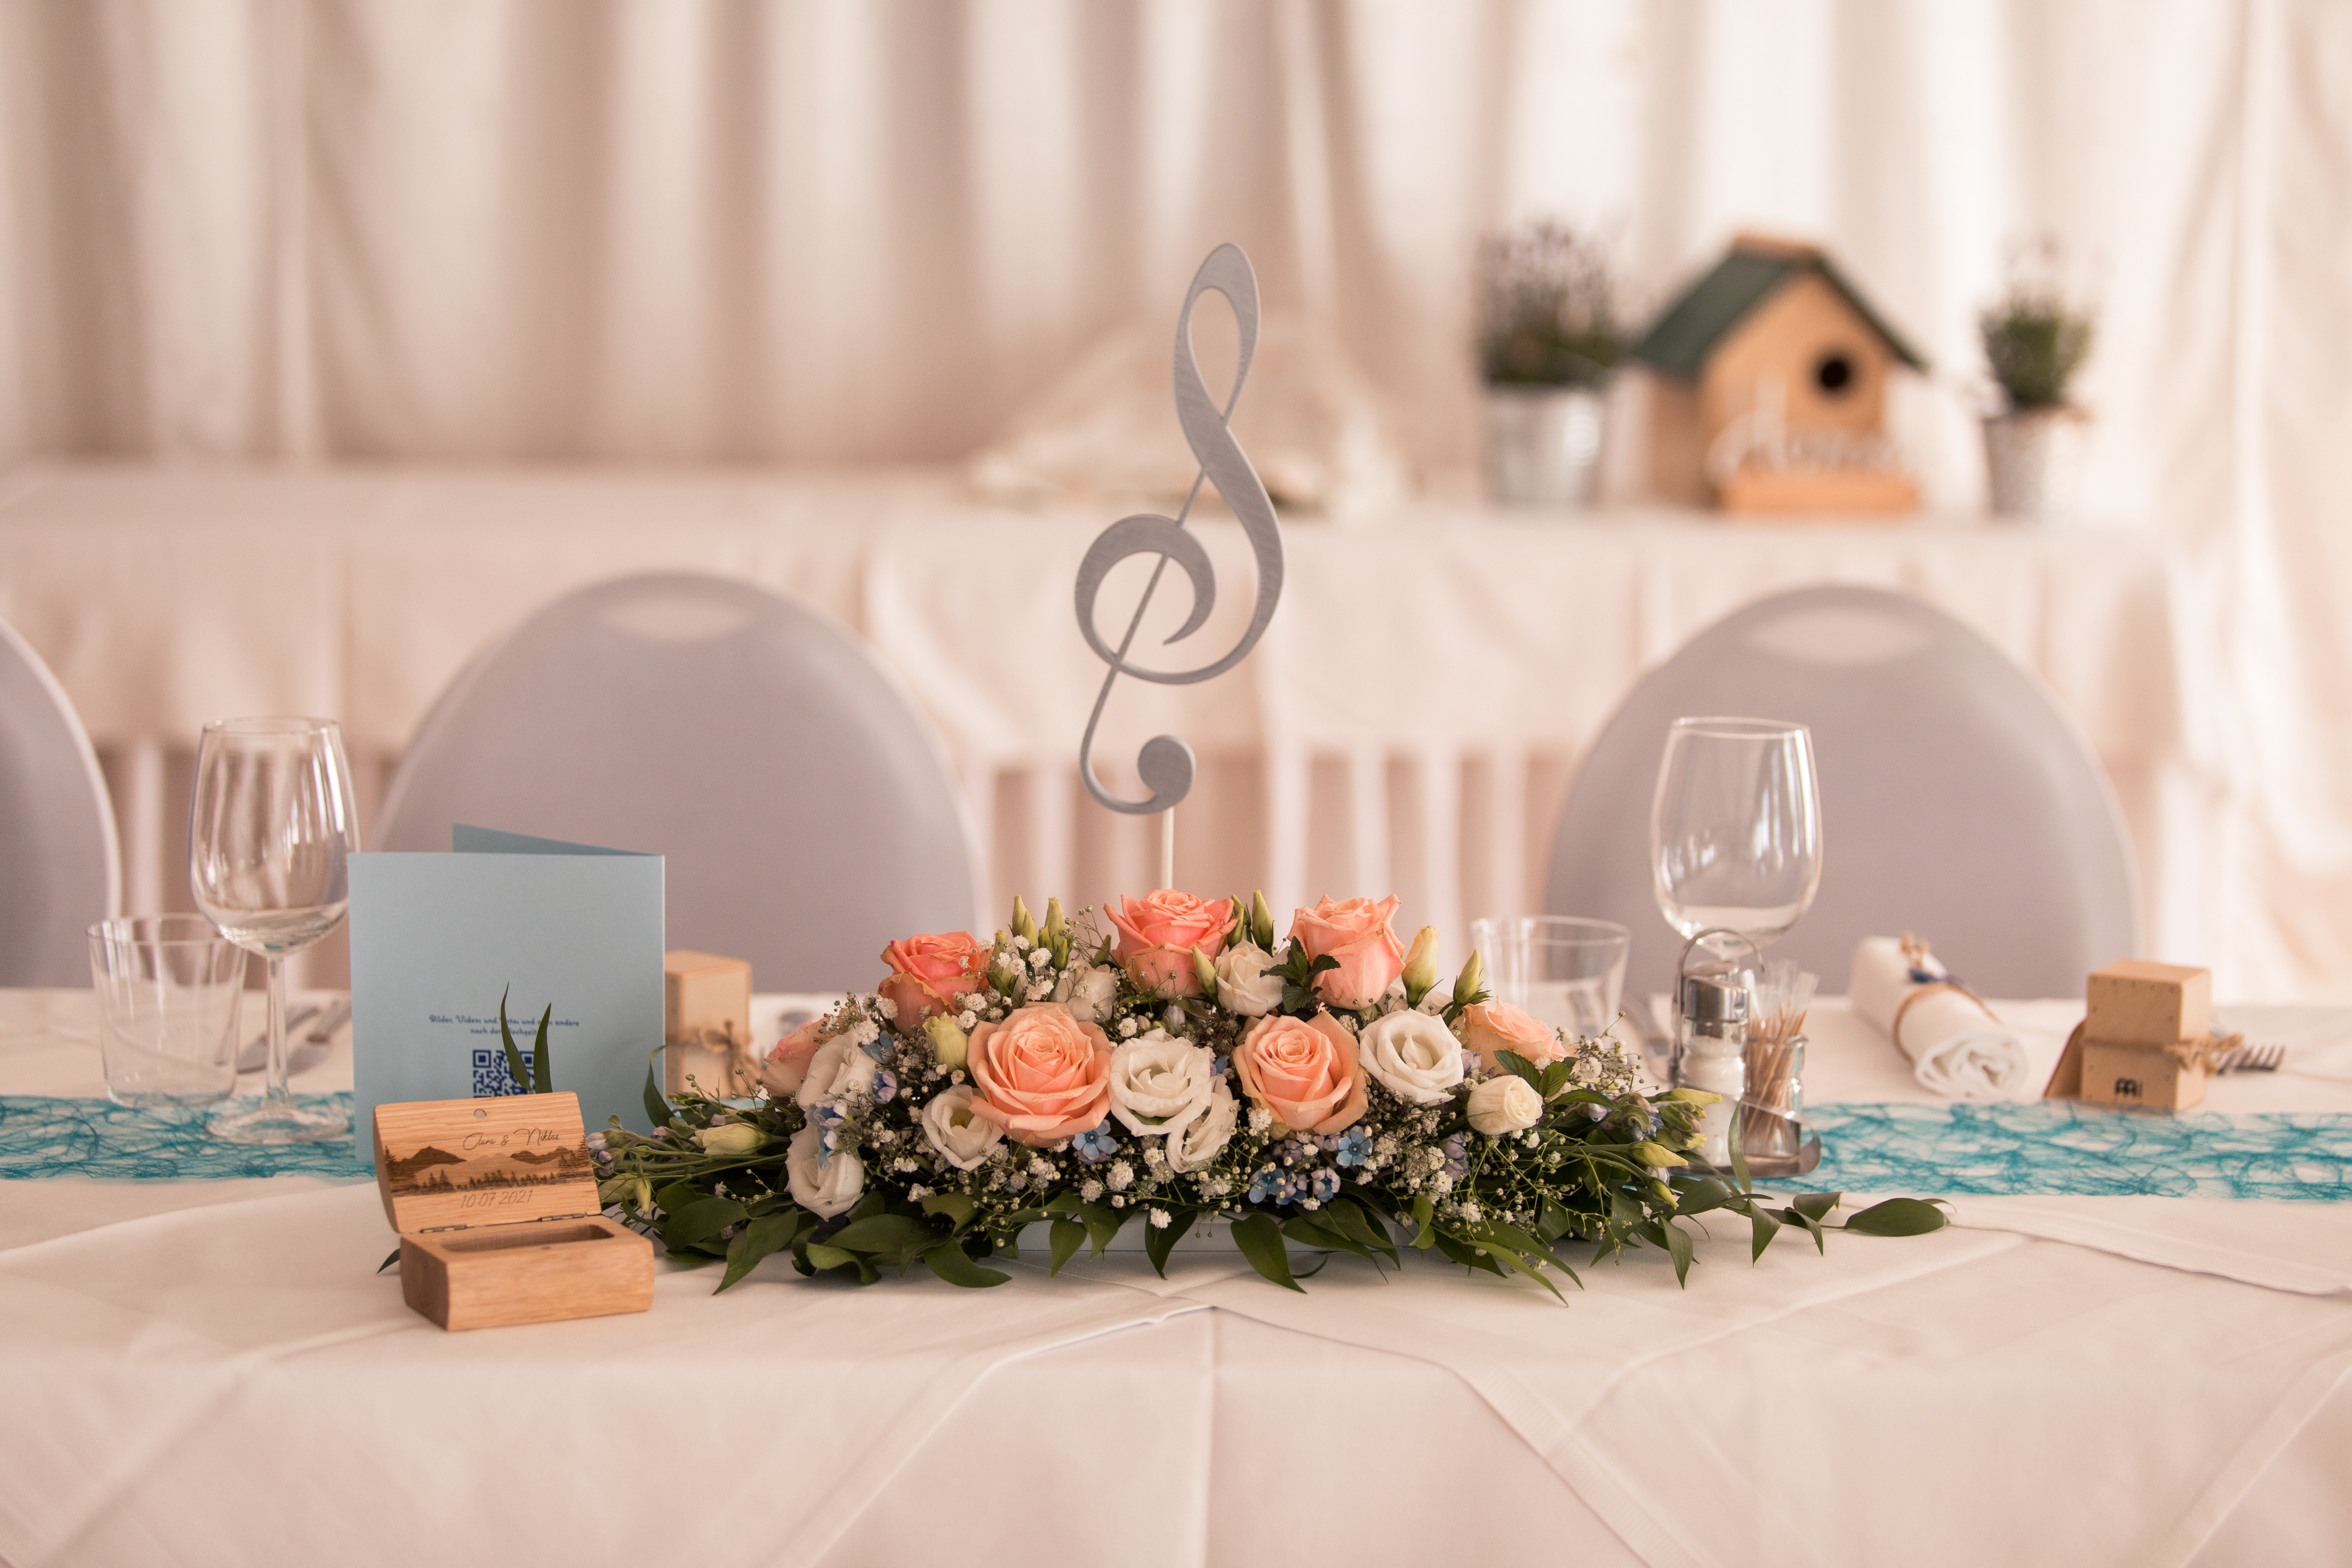 Wedding decoration / table sign / music clefs and symbols